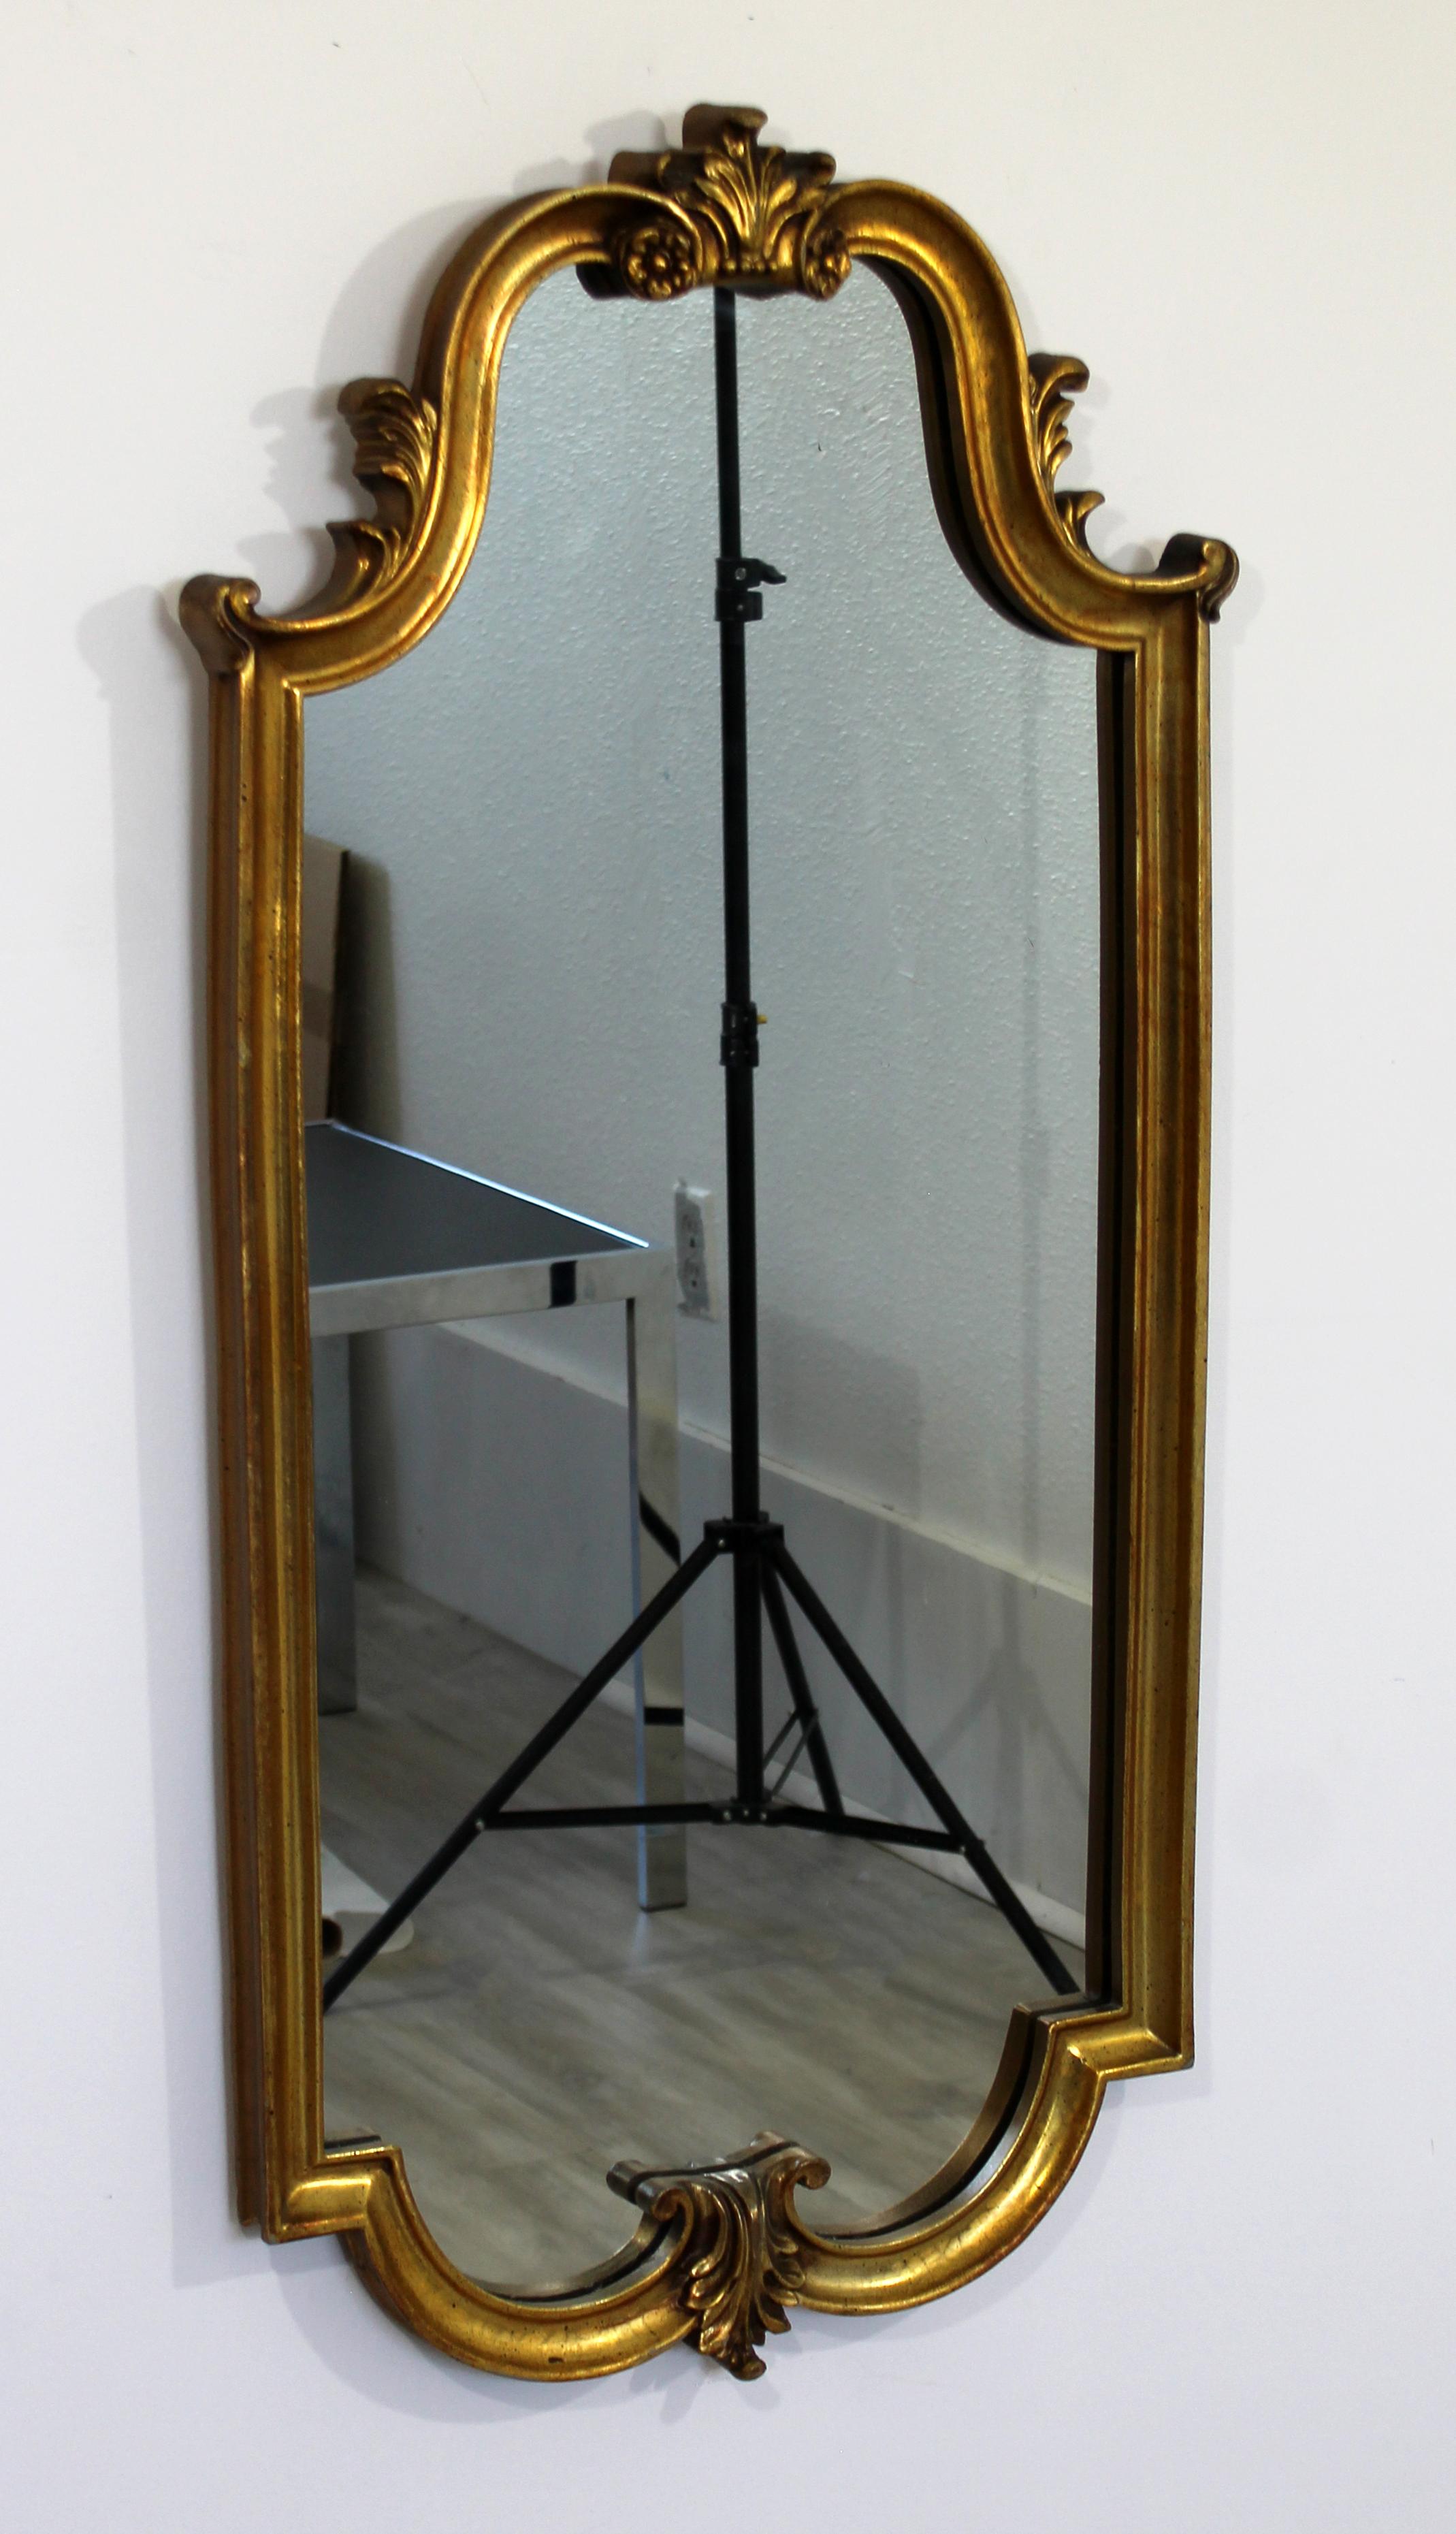 For your consideration is a glamorous, gold giltwood wall mirror, possibly by La Barge, circa 1960s. In very good vintage condition. The dimensions are 19.5